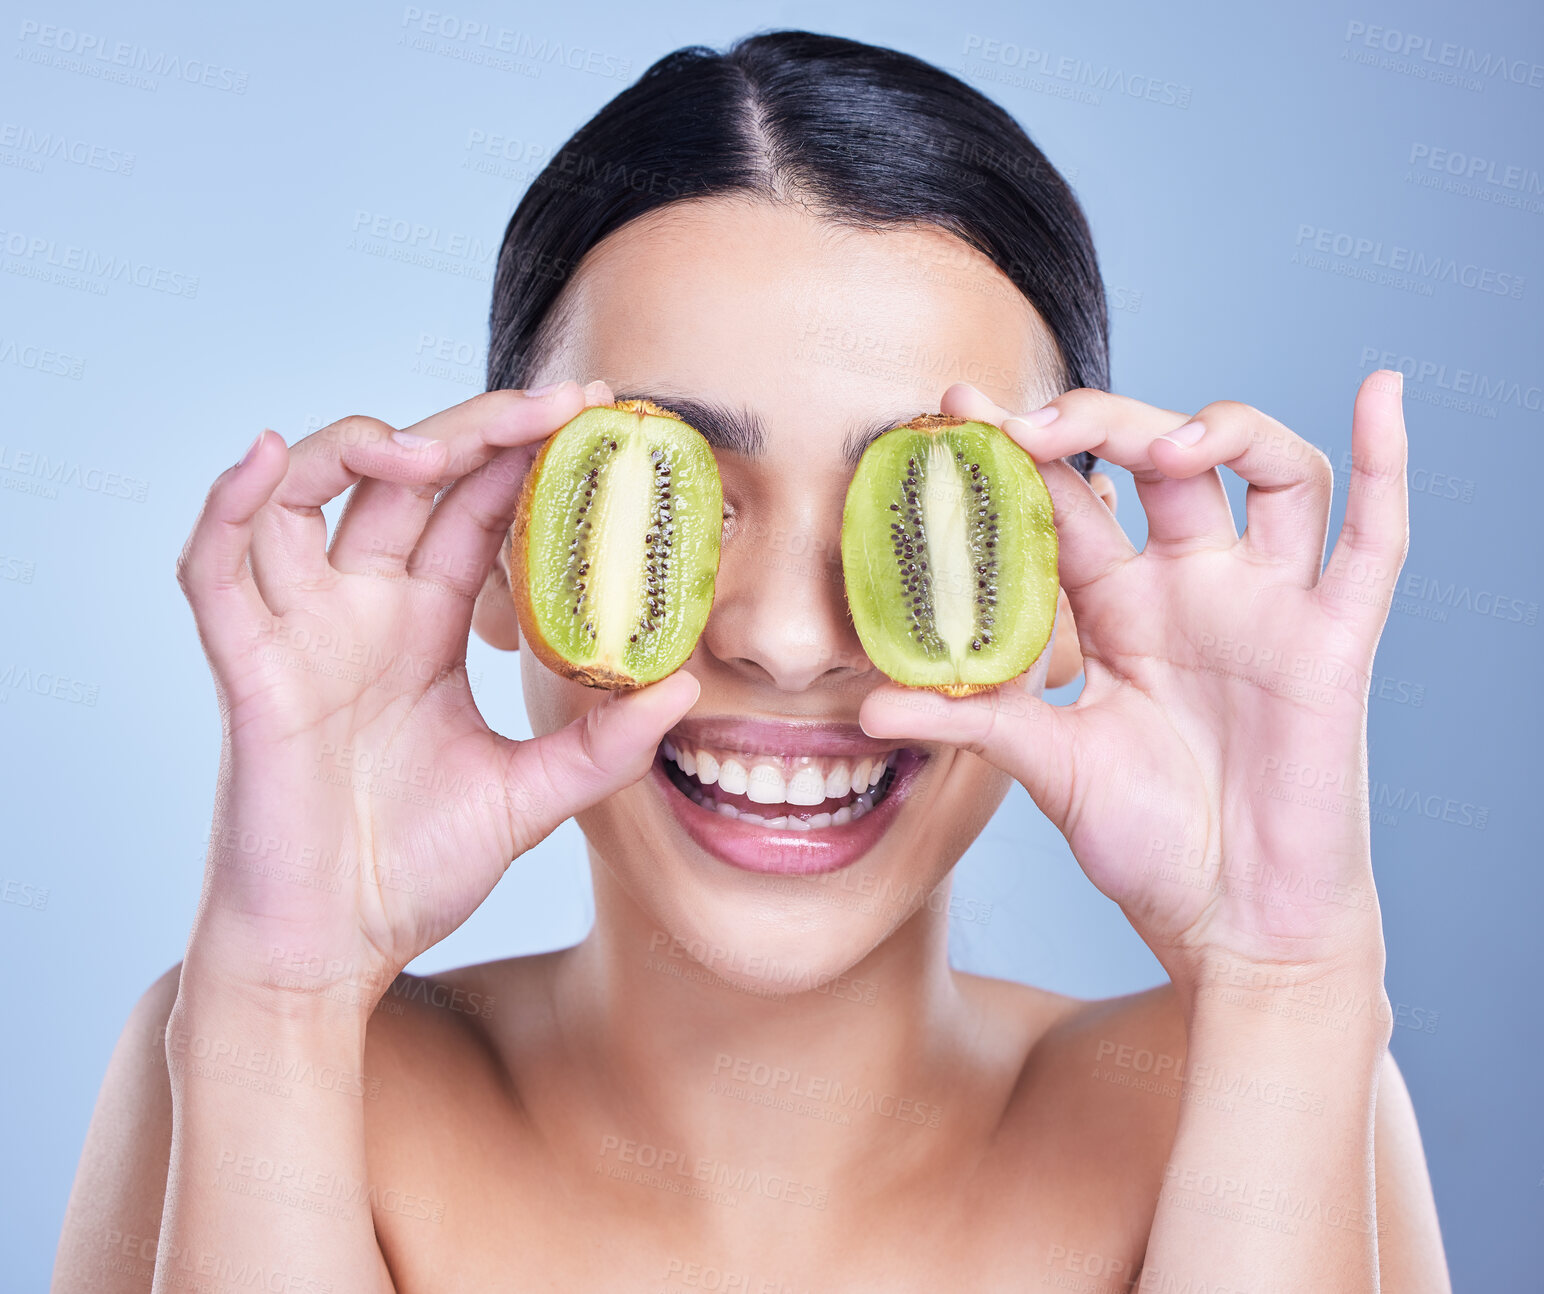 Buy stock photo A happy smiling mixed race woman holding a kiwi fruit. Hispanic model promoting the skin benefits of a healthy diet against a blue copyspace background